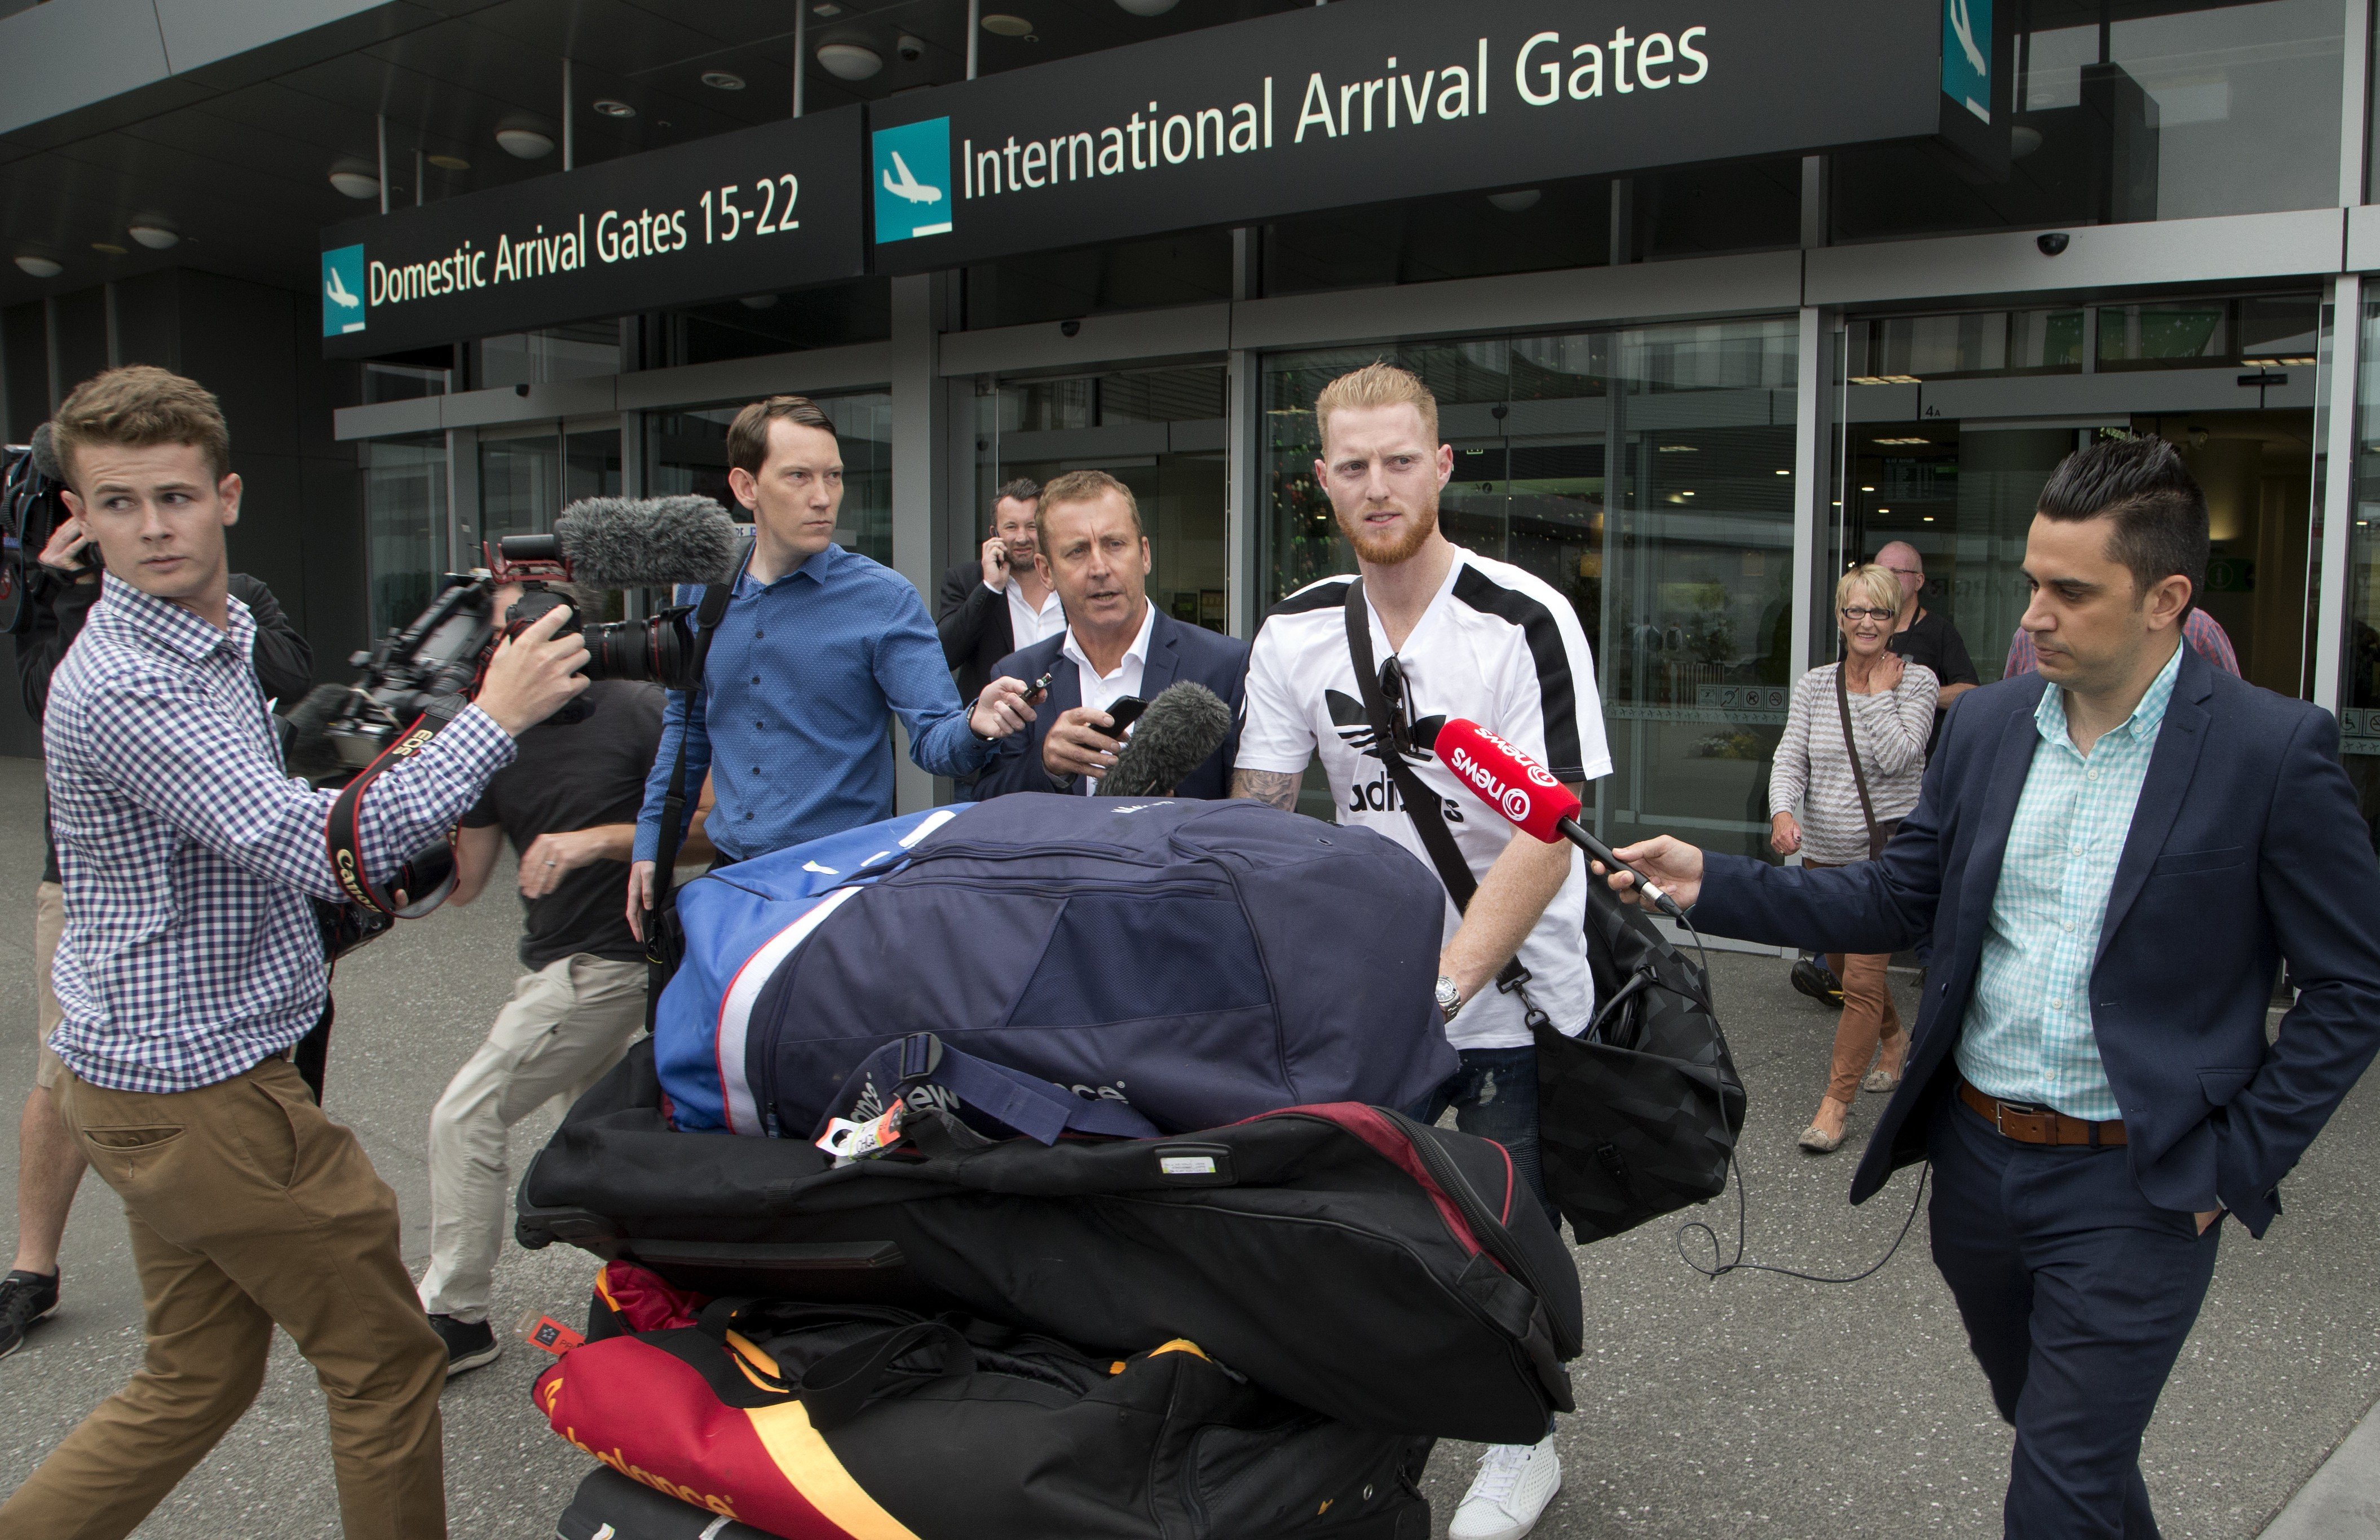 New Zealand-born England cricketer star Ben Stokes arrives in Christchurch, New Zealand, ahead of playing for Canterbury province. Photo: AP